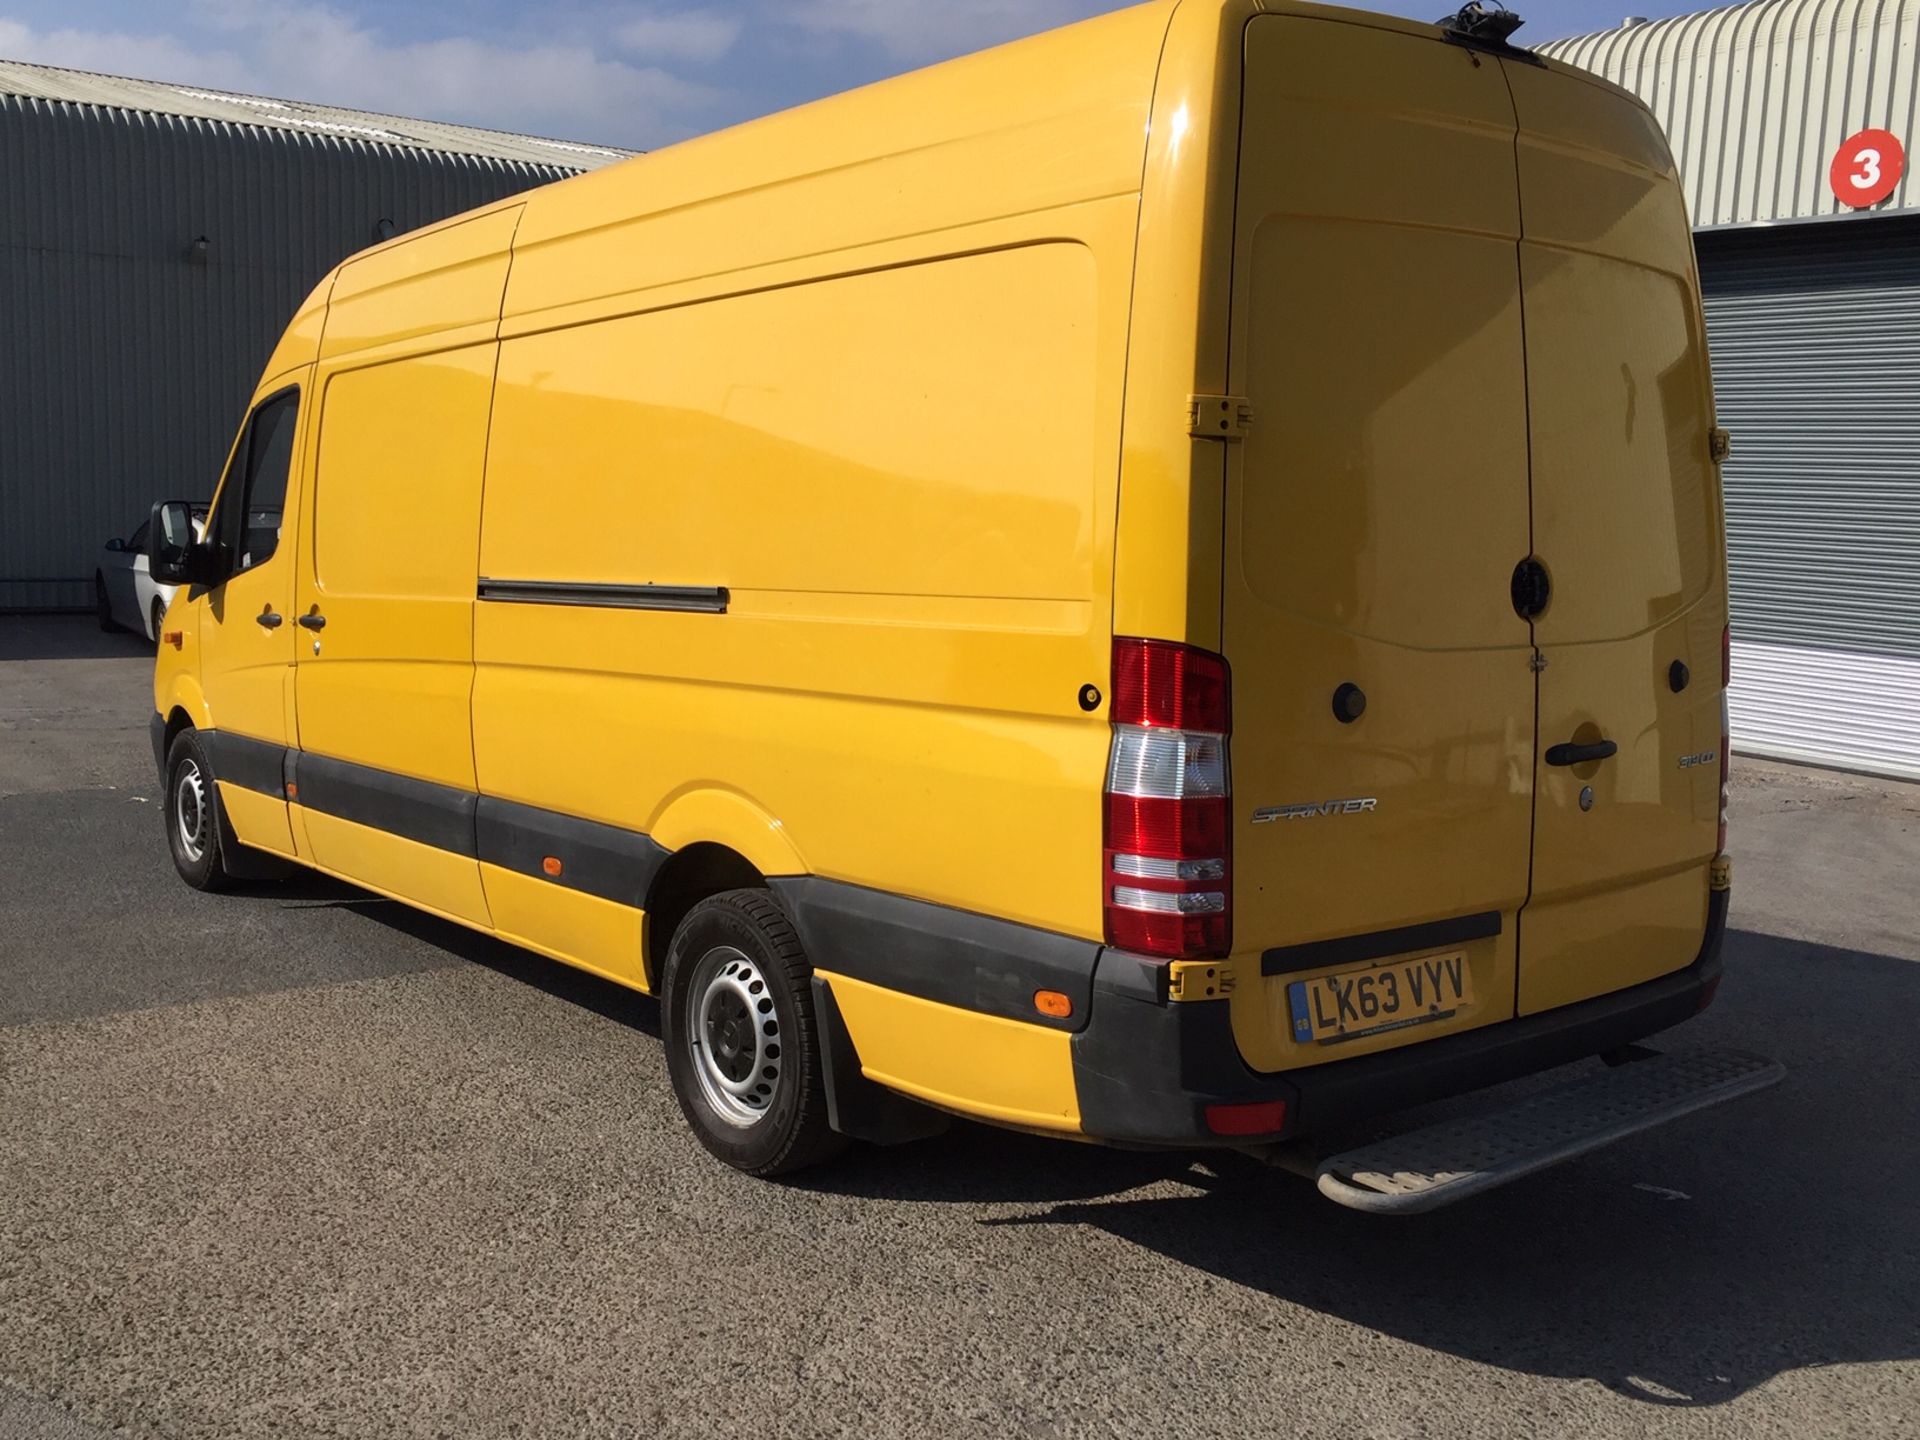 Mercedes sprinter 313CDi LWB 3.5 tonne 1 plc owner from new - Image 4 of 5